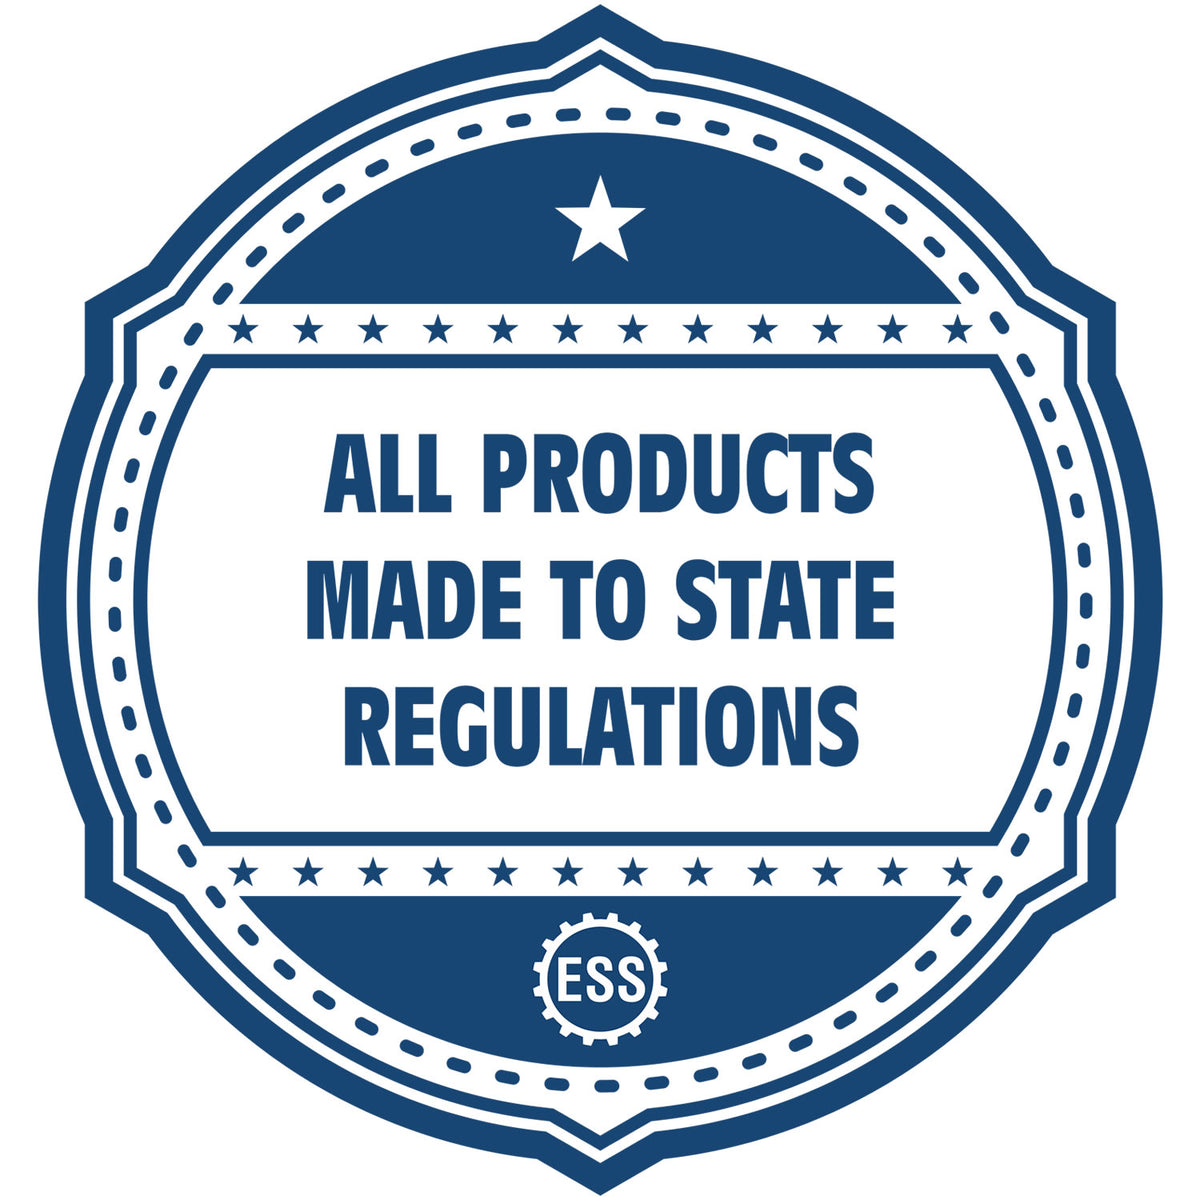 A blue icon or badge for the Self-Inking Maine Geologist Stamp showing that this product is made in compliance with state regulations.